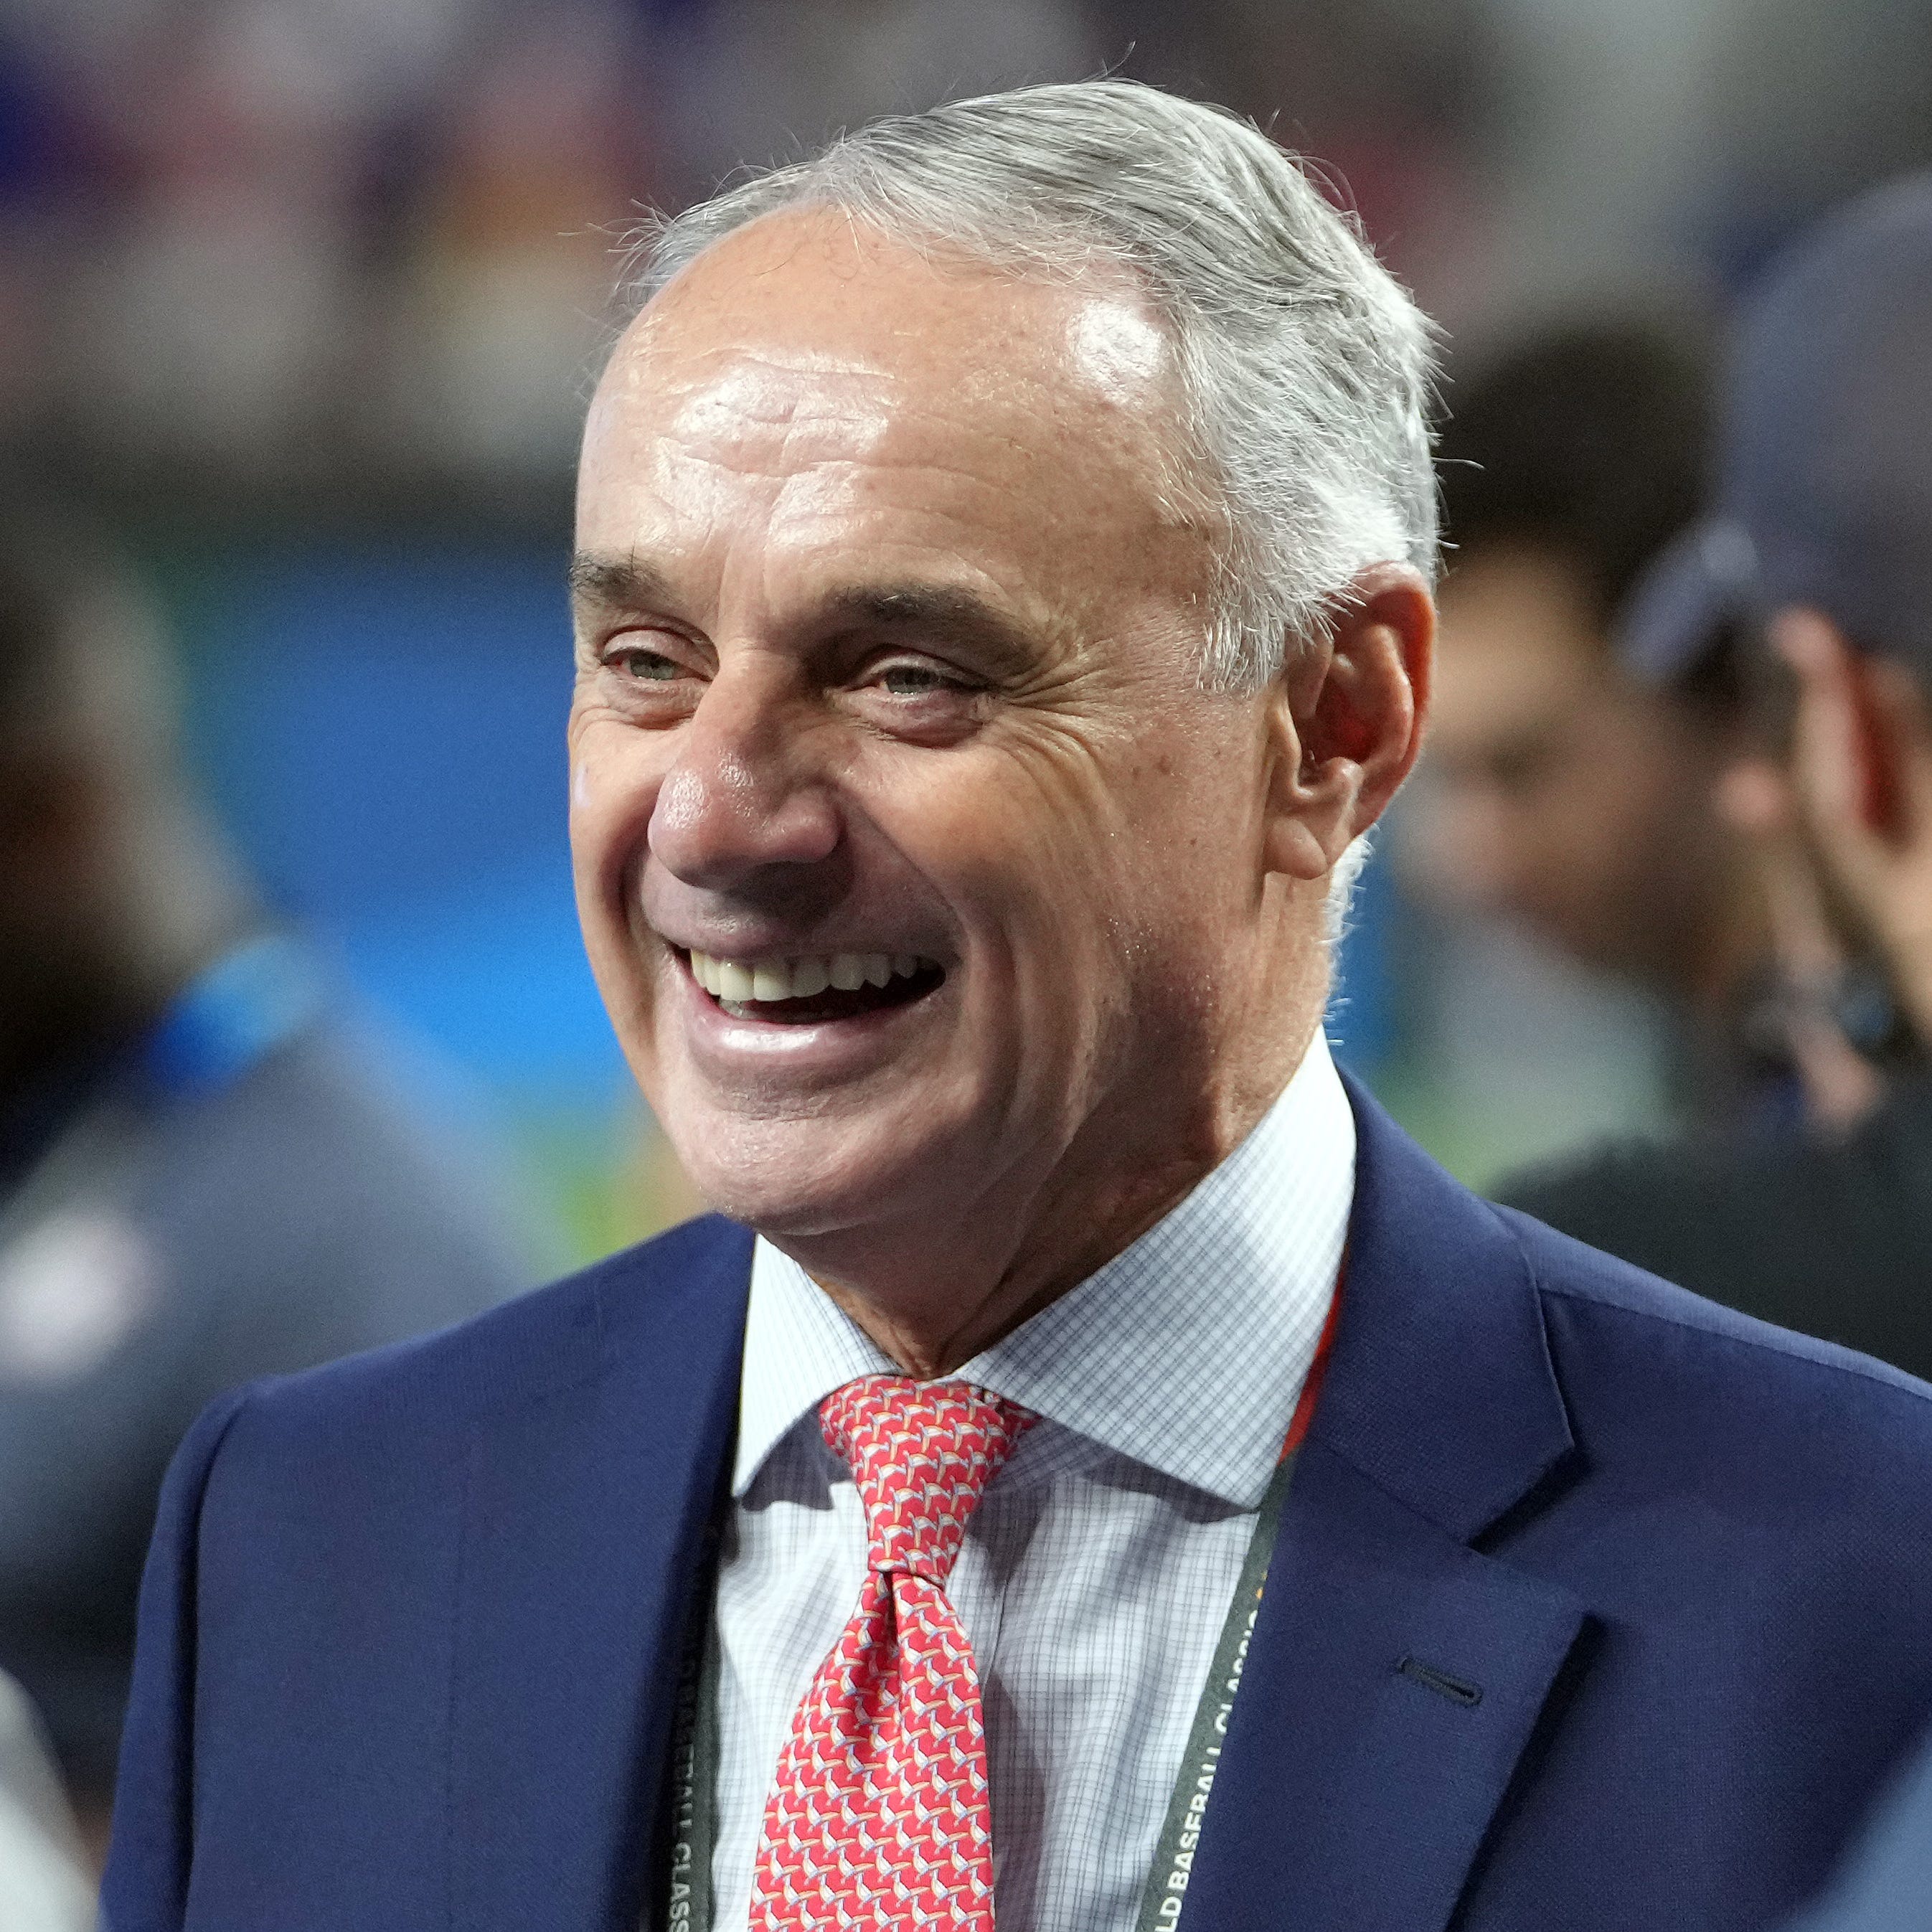 Rob Manfred before the World Baseball Classic championship game.